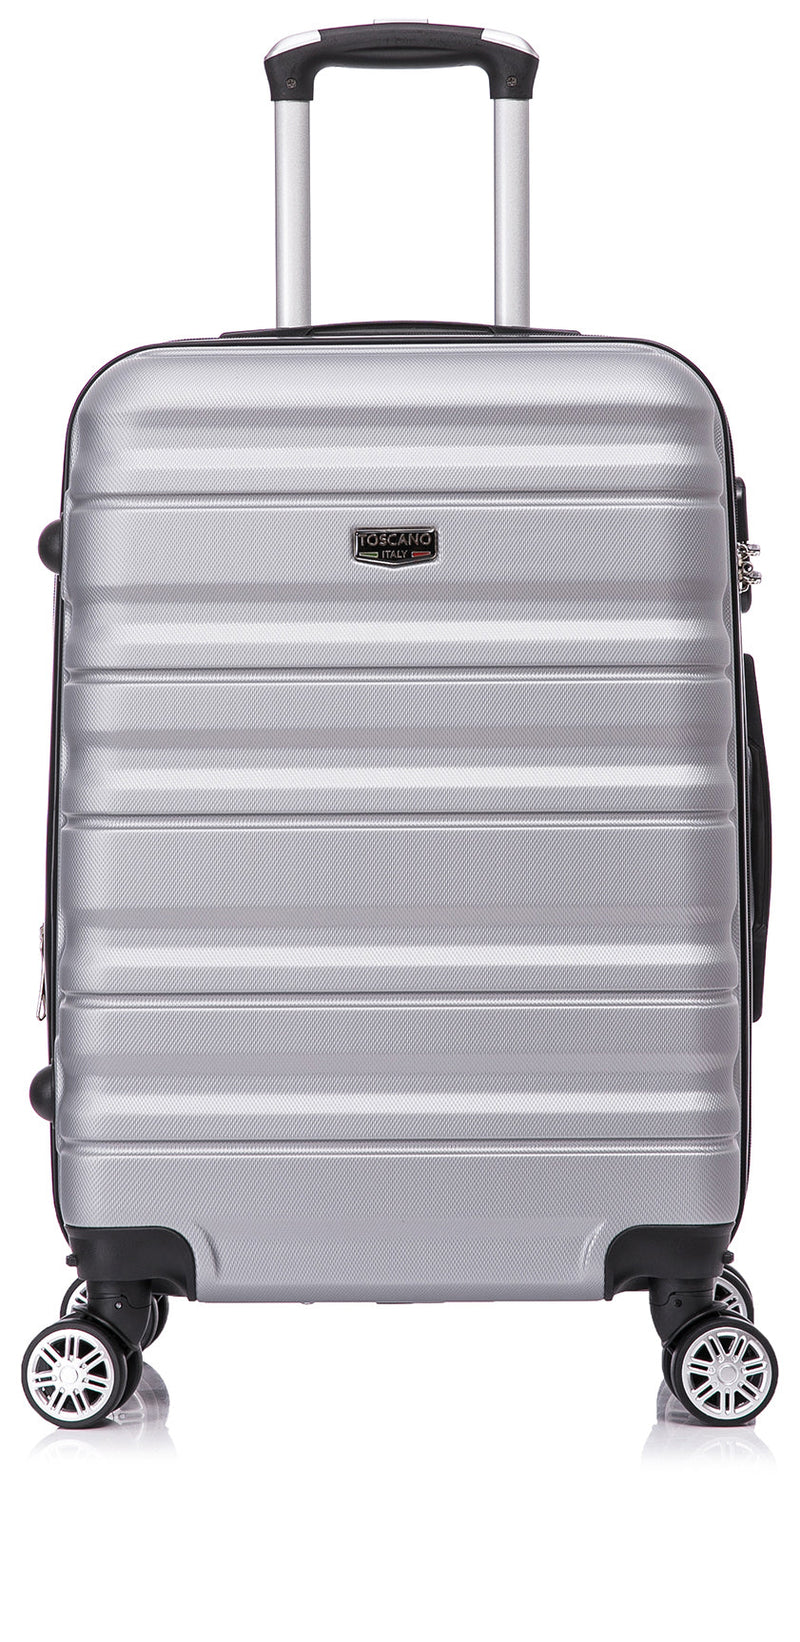 TOSCANO MAGNIFICA 28" ABS Hardshell Travel Luggage Suitcase